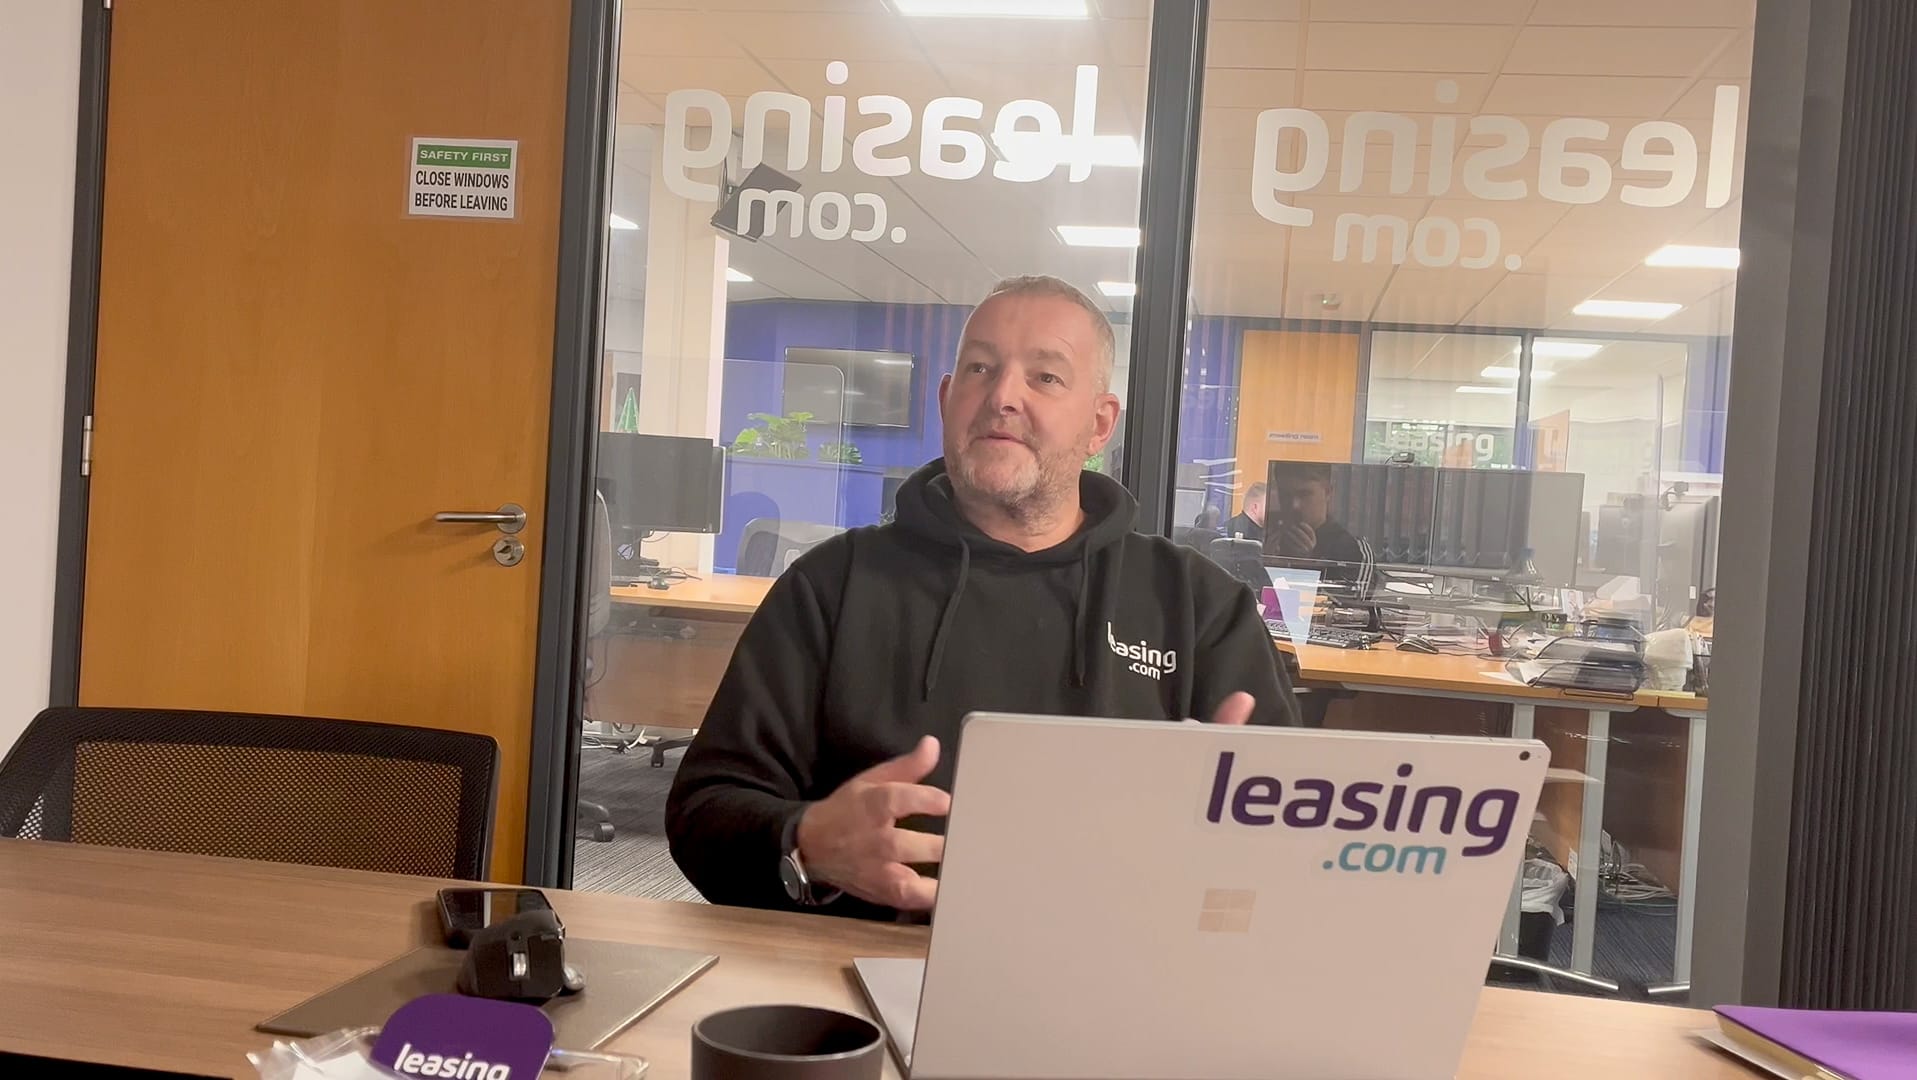 Dave Timmis On Extending Leasing.com Deal Until 2027